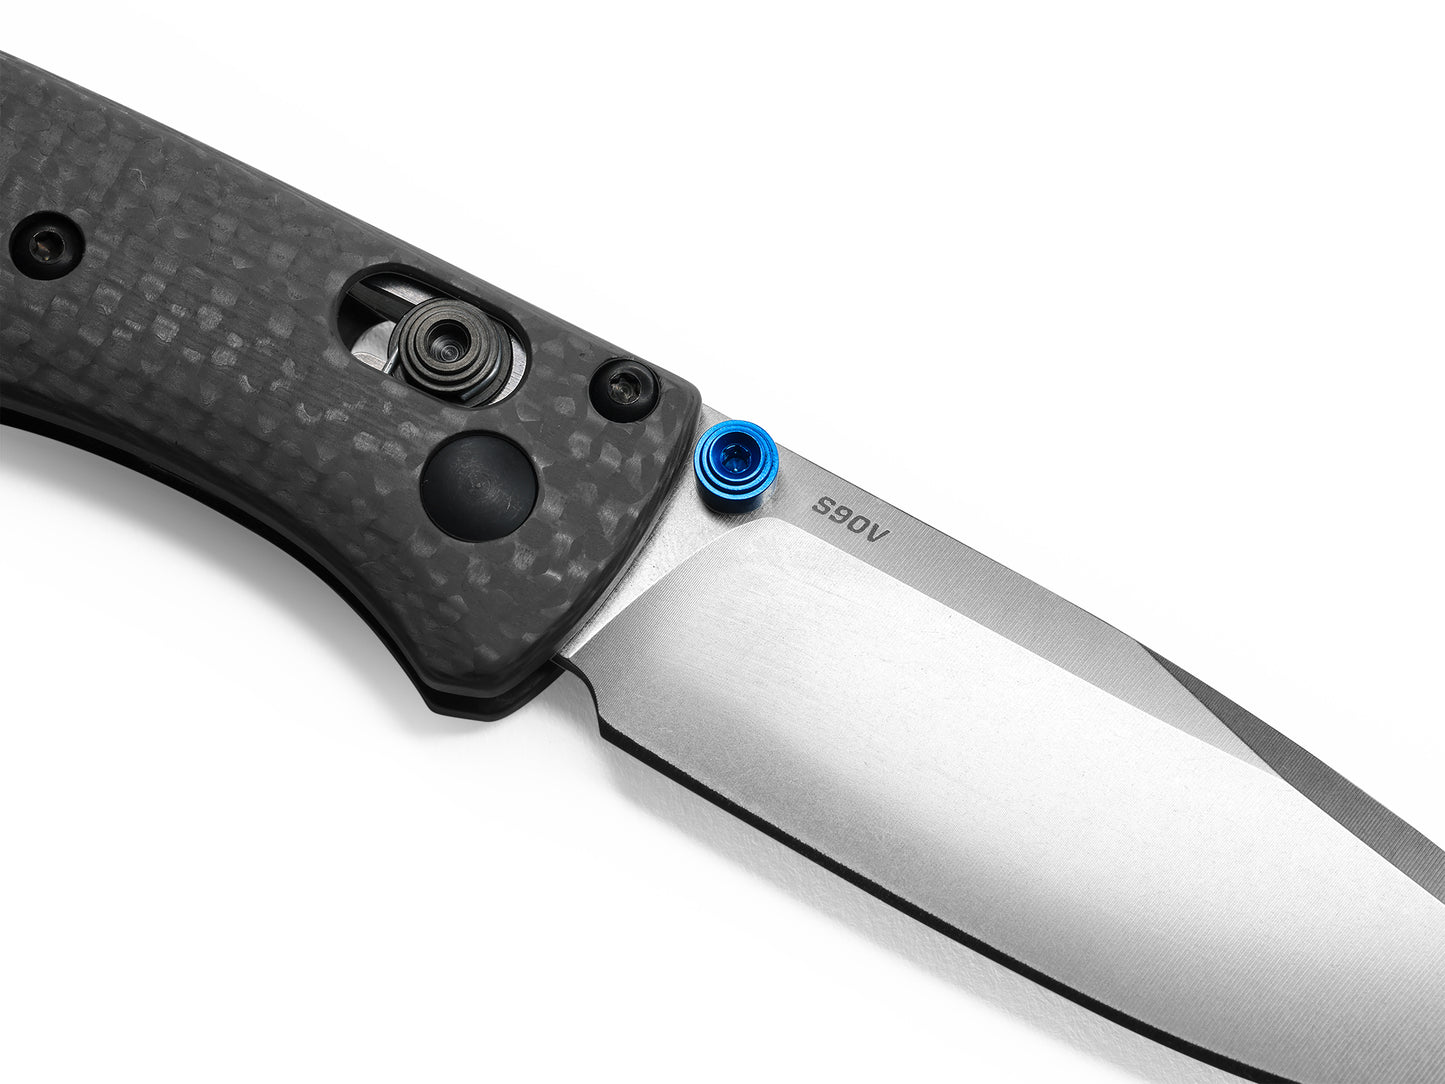 Benchmade 533-3 Mini Bugout 2.82" CPM-S90V Folding Knife with Carbon Fiber Handle